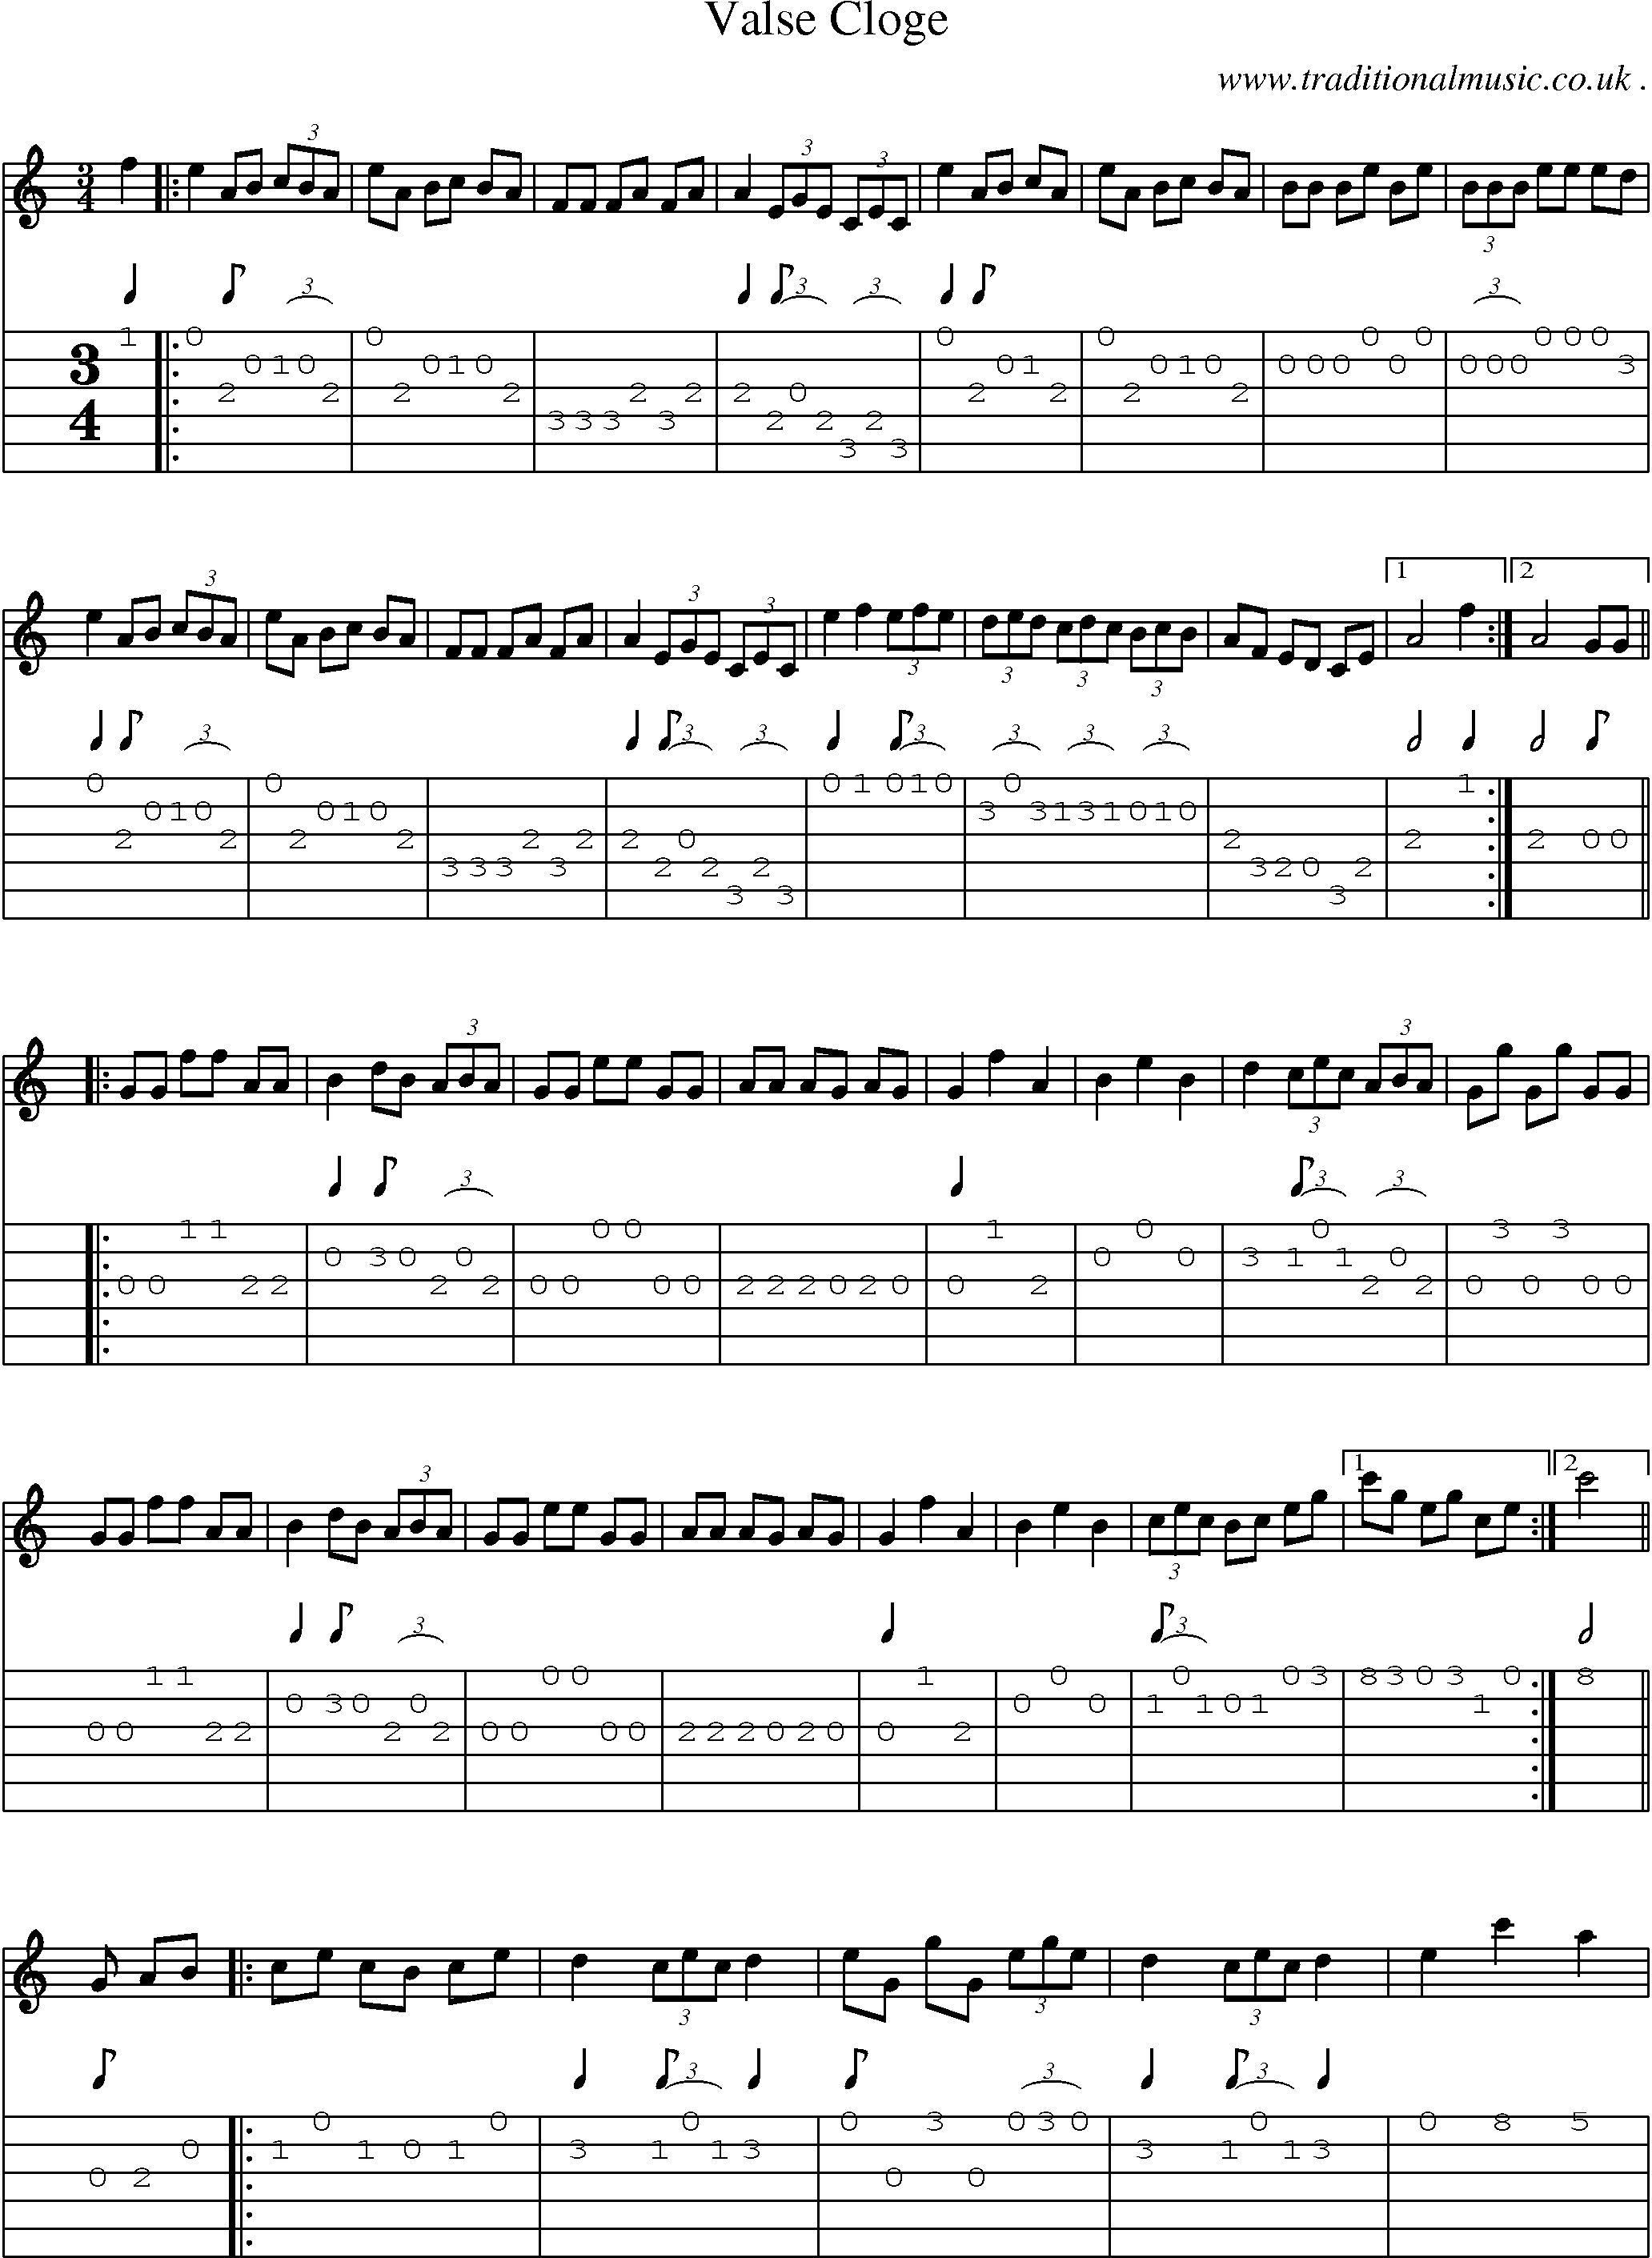 Sheet-Music and Guitar Tabs for Valse Cloge